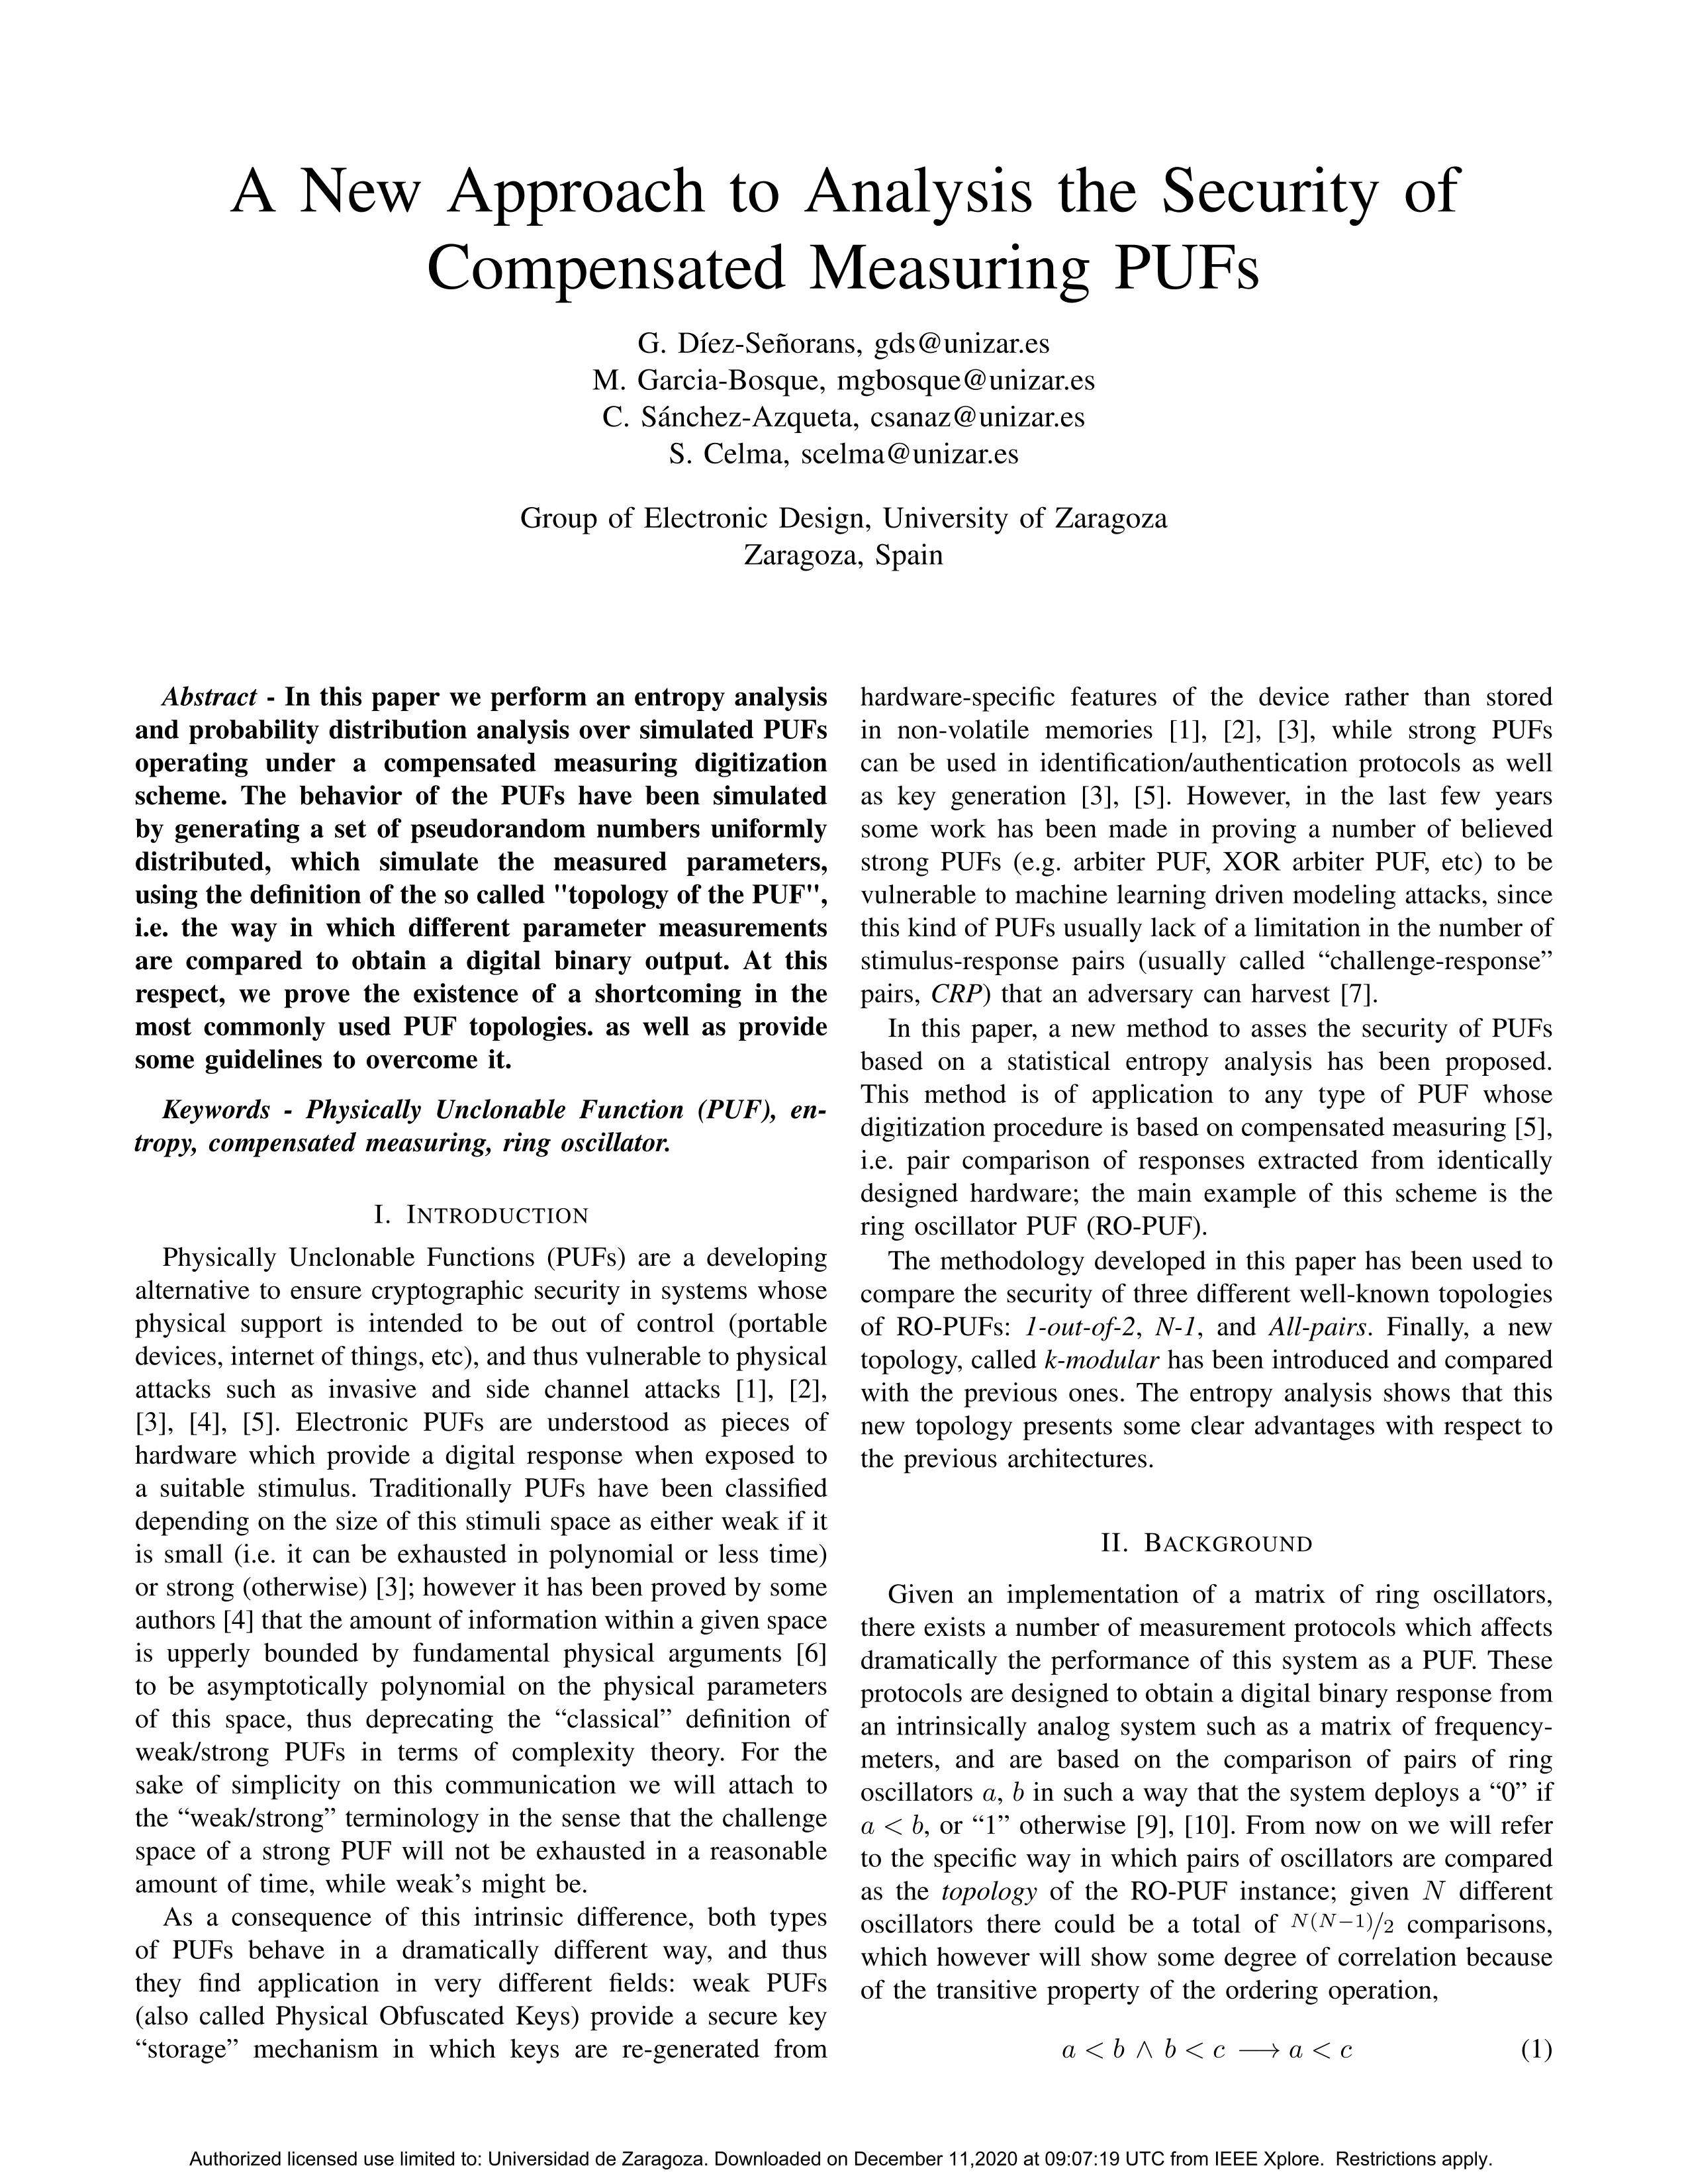 A New Approach to Analysis the Security of Compensated Measuring PUFs